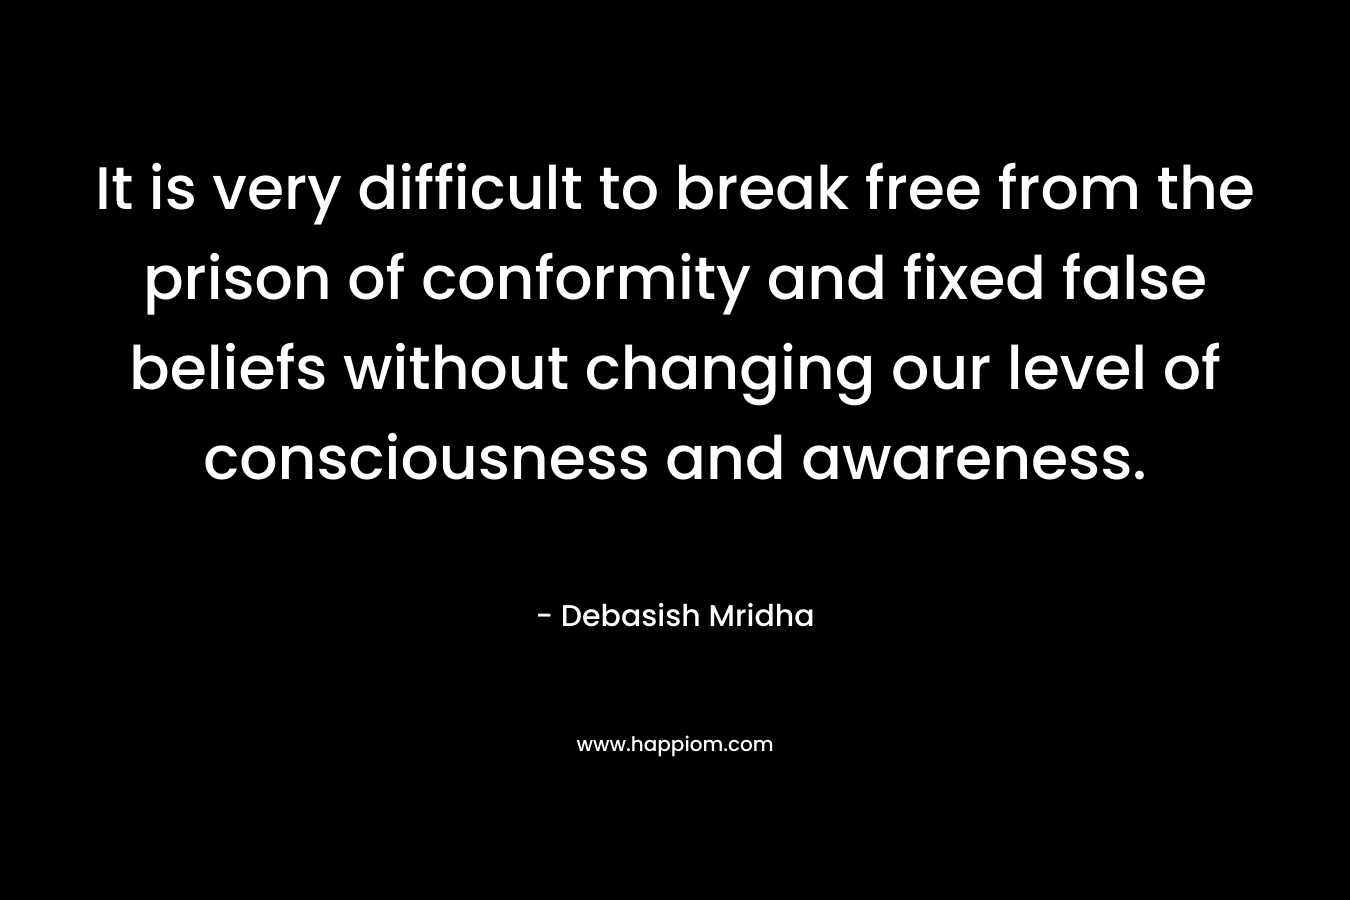 It is very difficult to break free from the prison of conformity and fixed false beliefs without changing our level of consciousness and awareness.